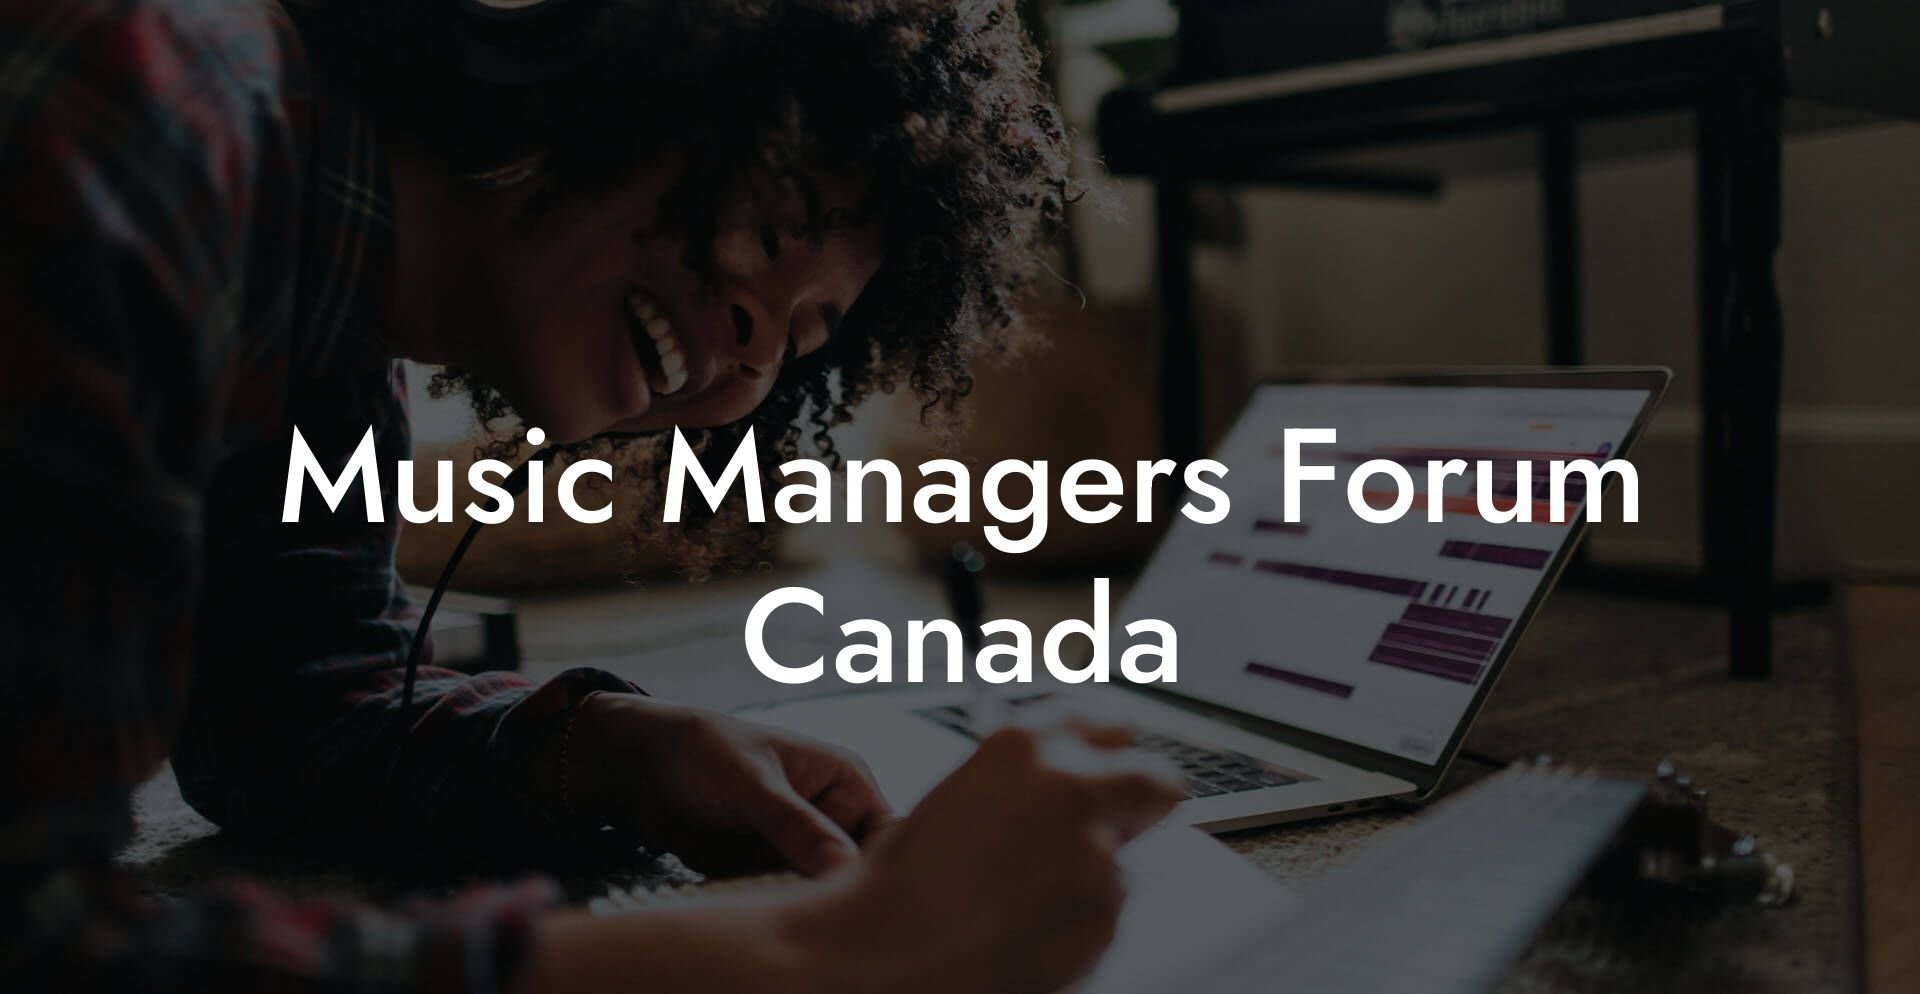 Music Managers Forum Canada